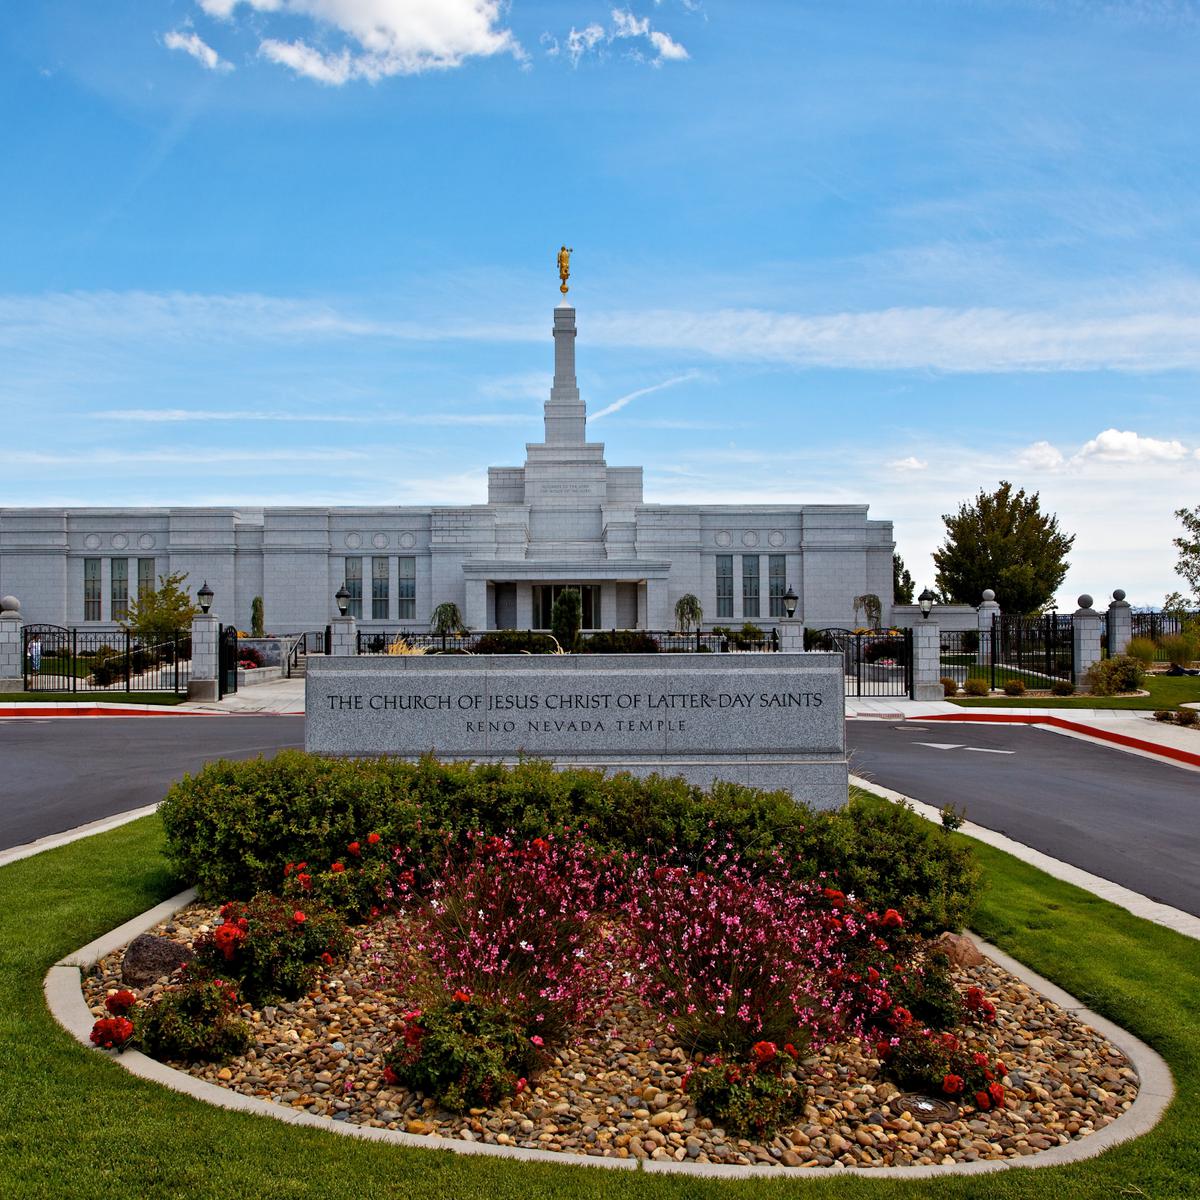 The Reno Nevada Temple, a white building with a central spire topped by a golden statue of an angel blowing a trumpet.